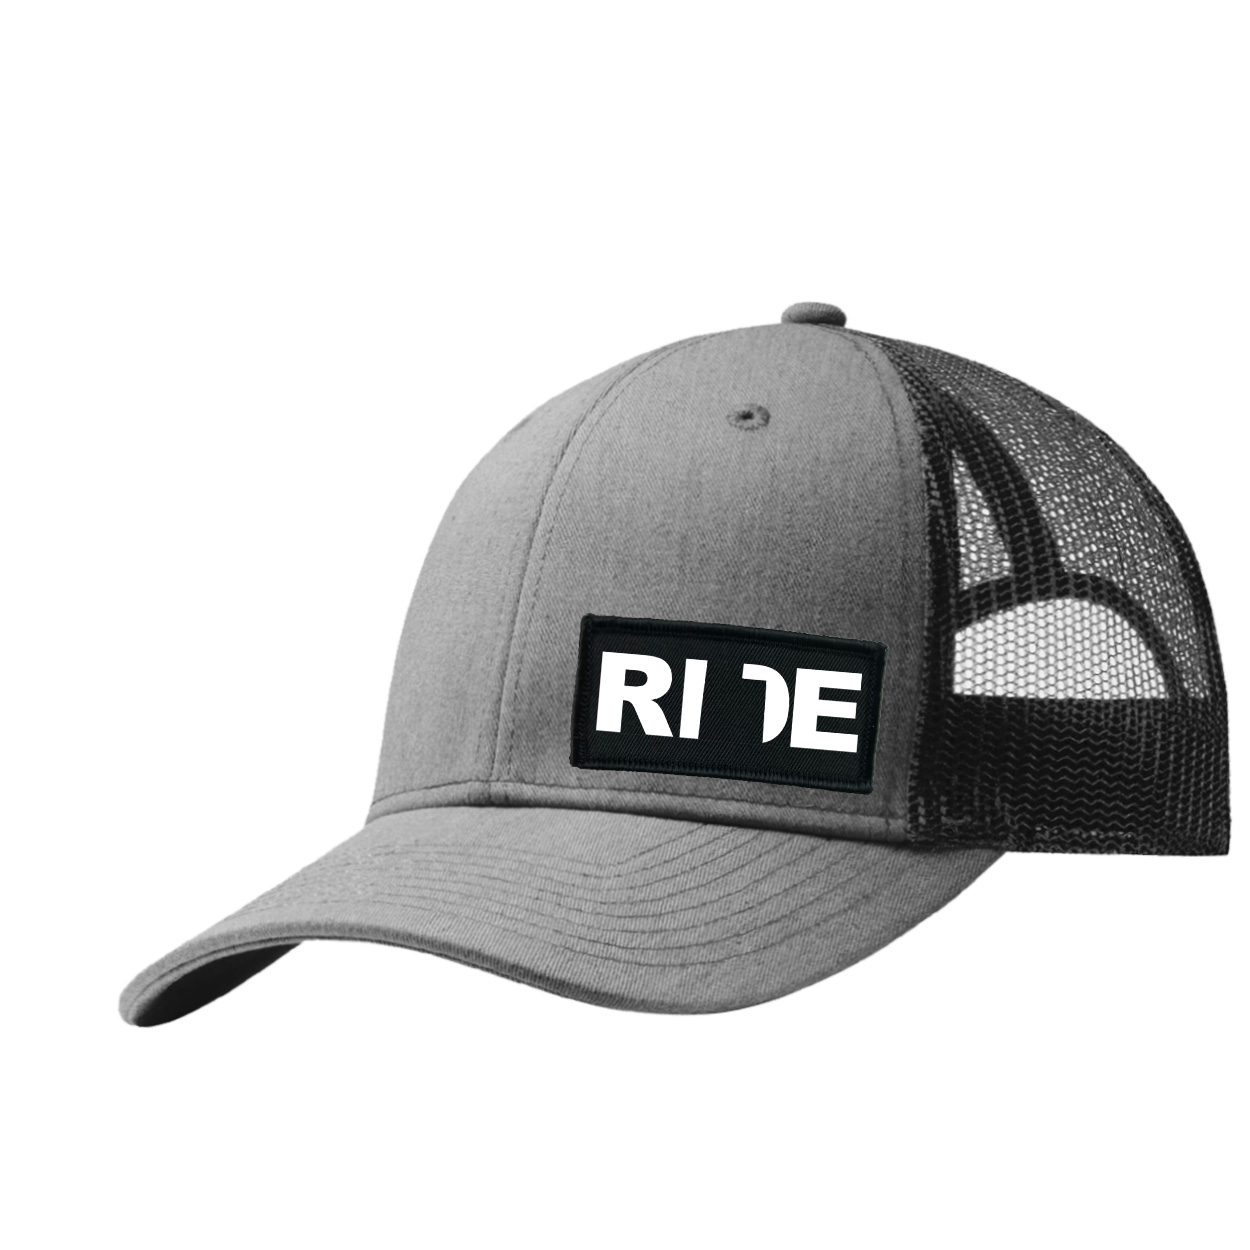 Ride Utah Night Out Woven Patch Snapback Trucker Hat Heather Gray/Black (White Logo)